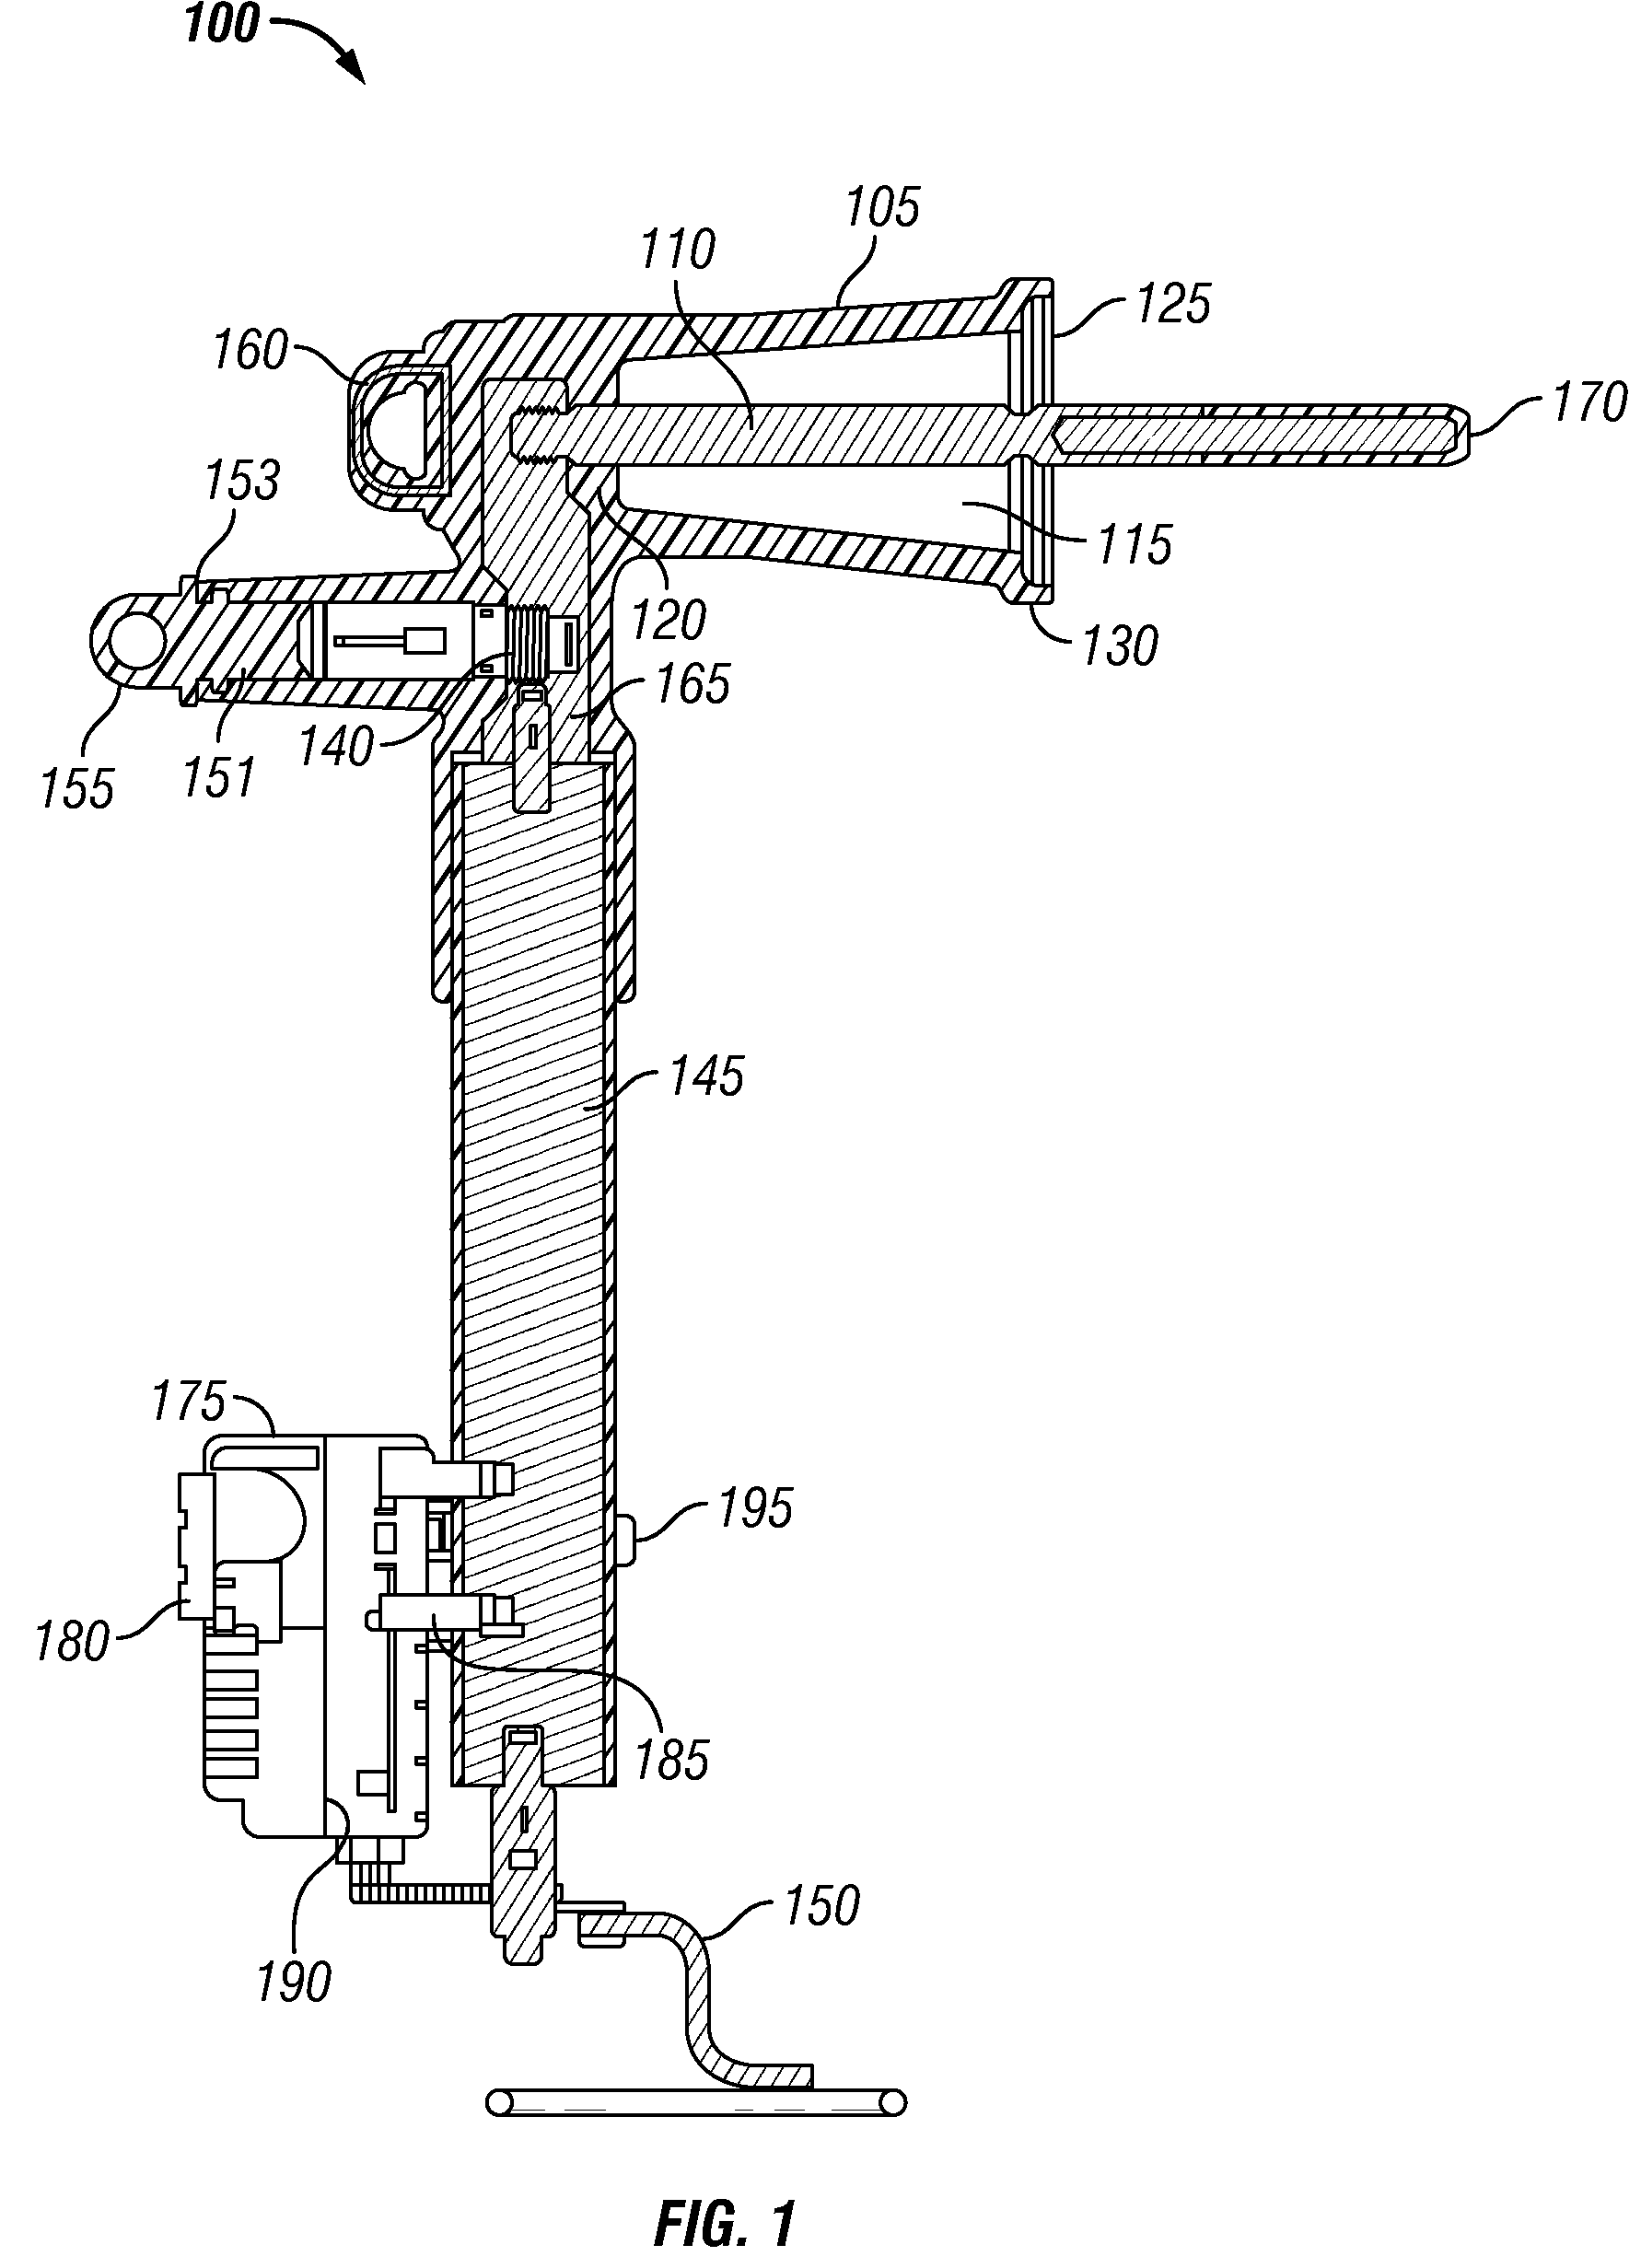 Fully insulated fuse test and ground device